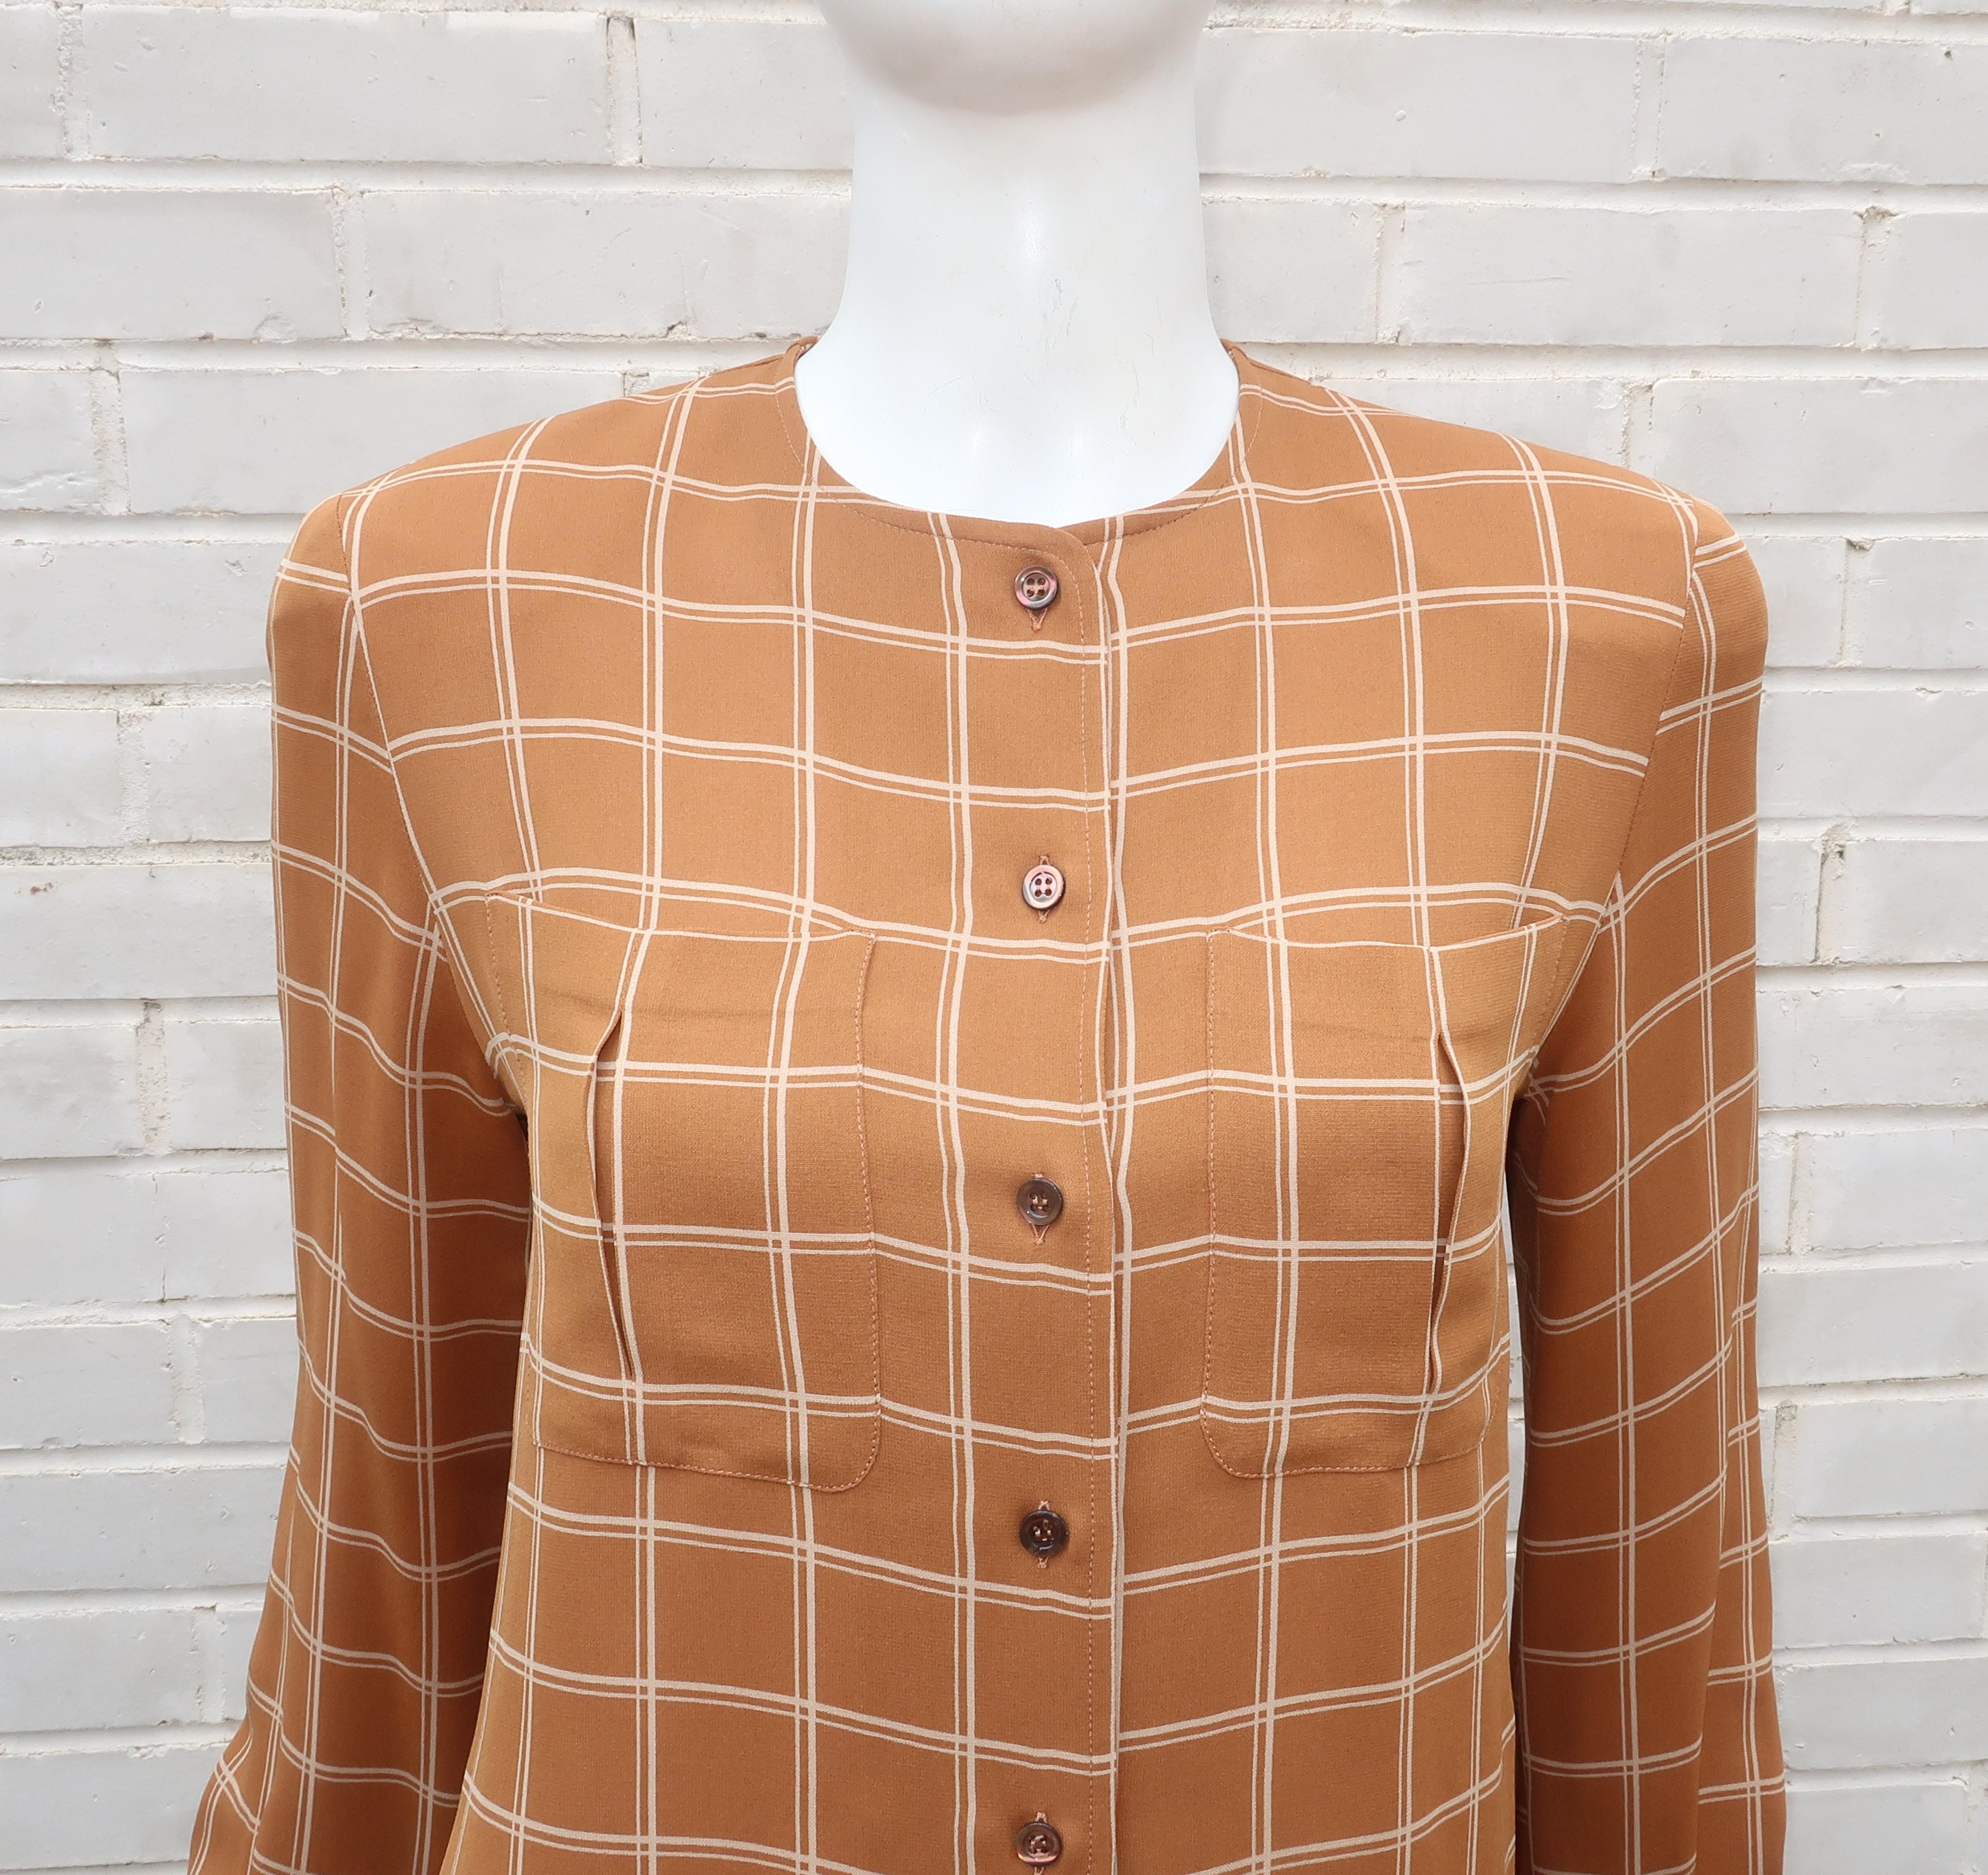 Giorgio Armani Le Collezioni 1990's silk crepe de chine blouse in a light cocoa brown & ivory white windowpane pattern with lovely details including pleated breast pockets and long side vents with finished hem.  The collarless silhouette buttons up